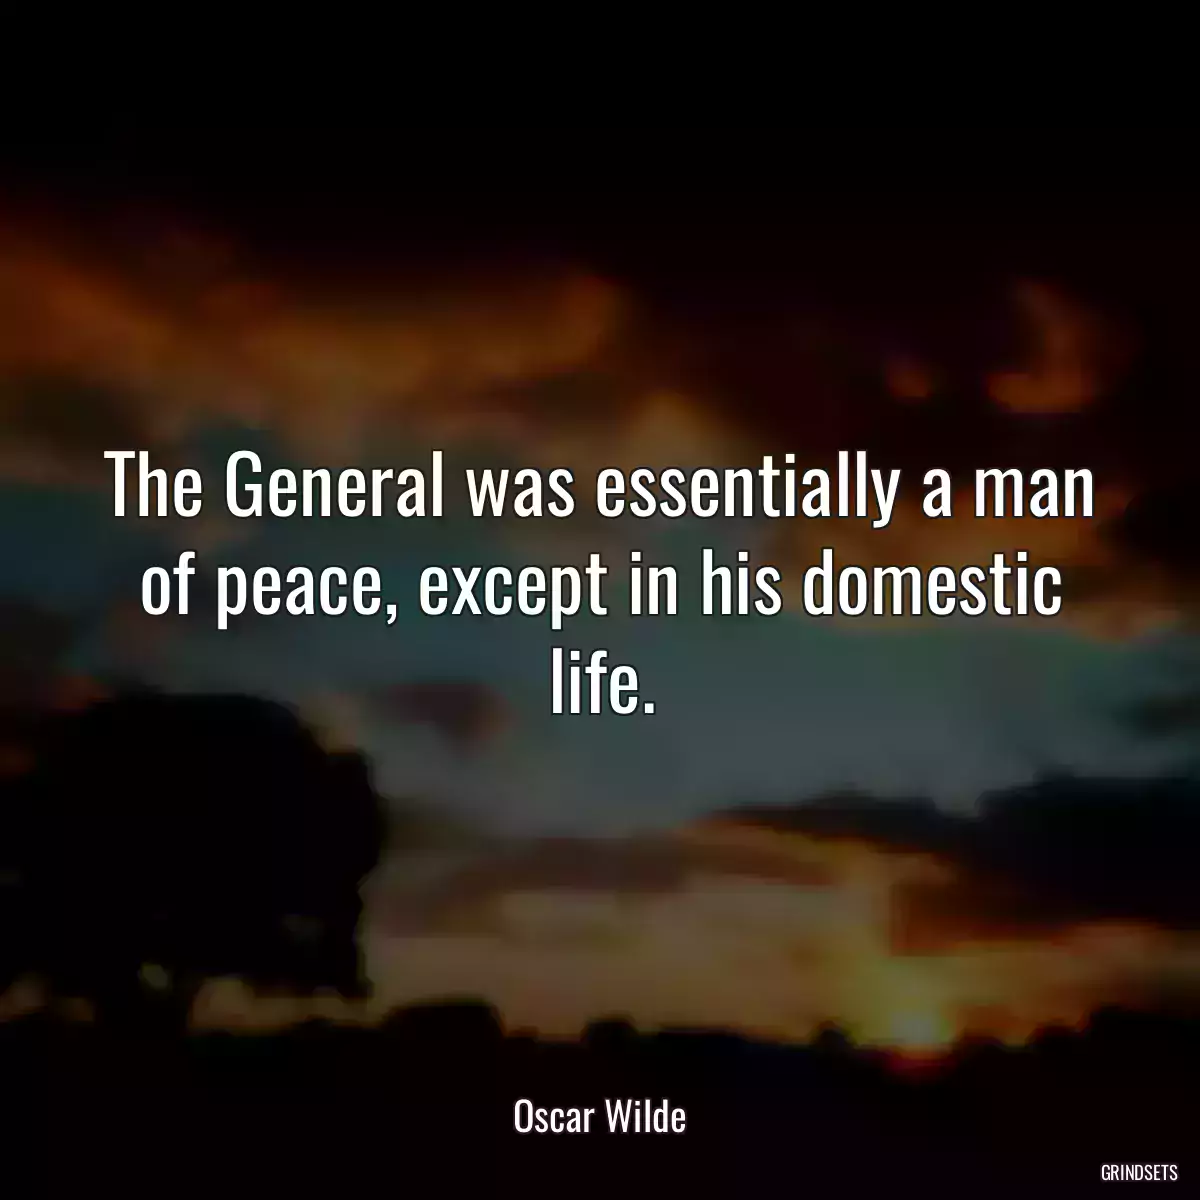 The General was essentially a man of peace, except in his domestic life.